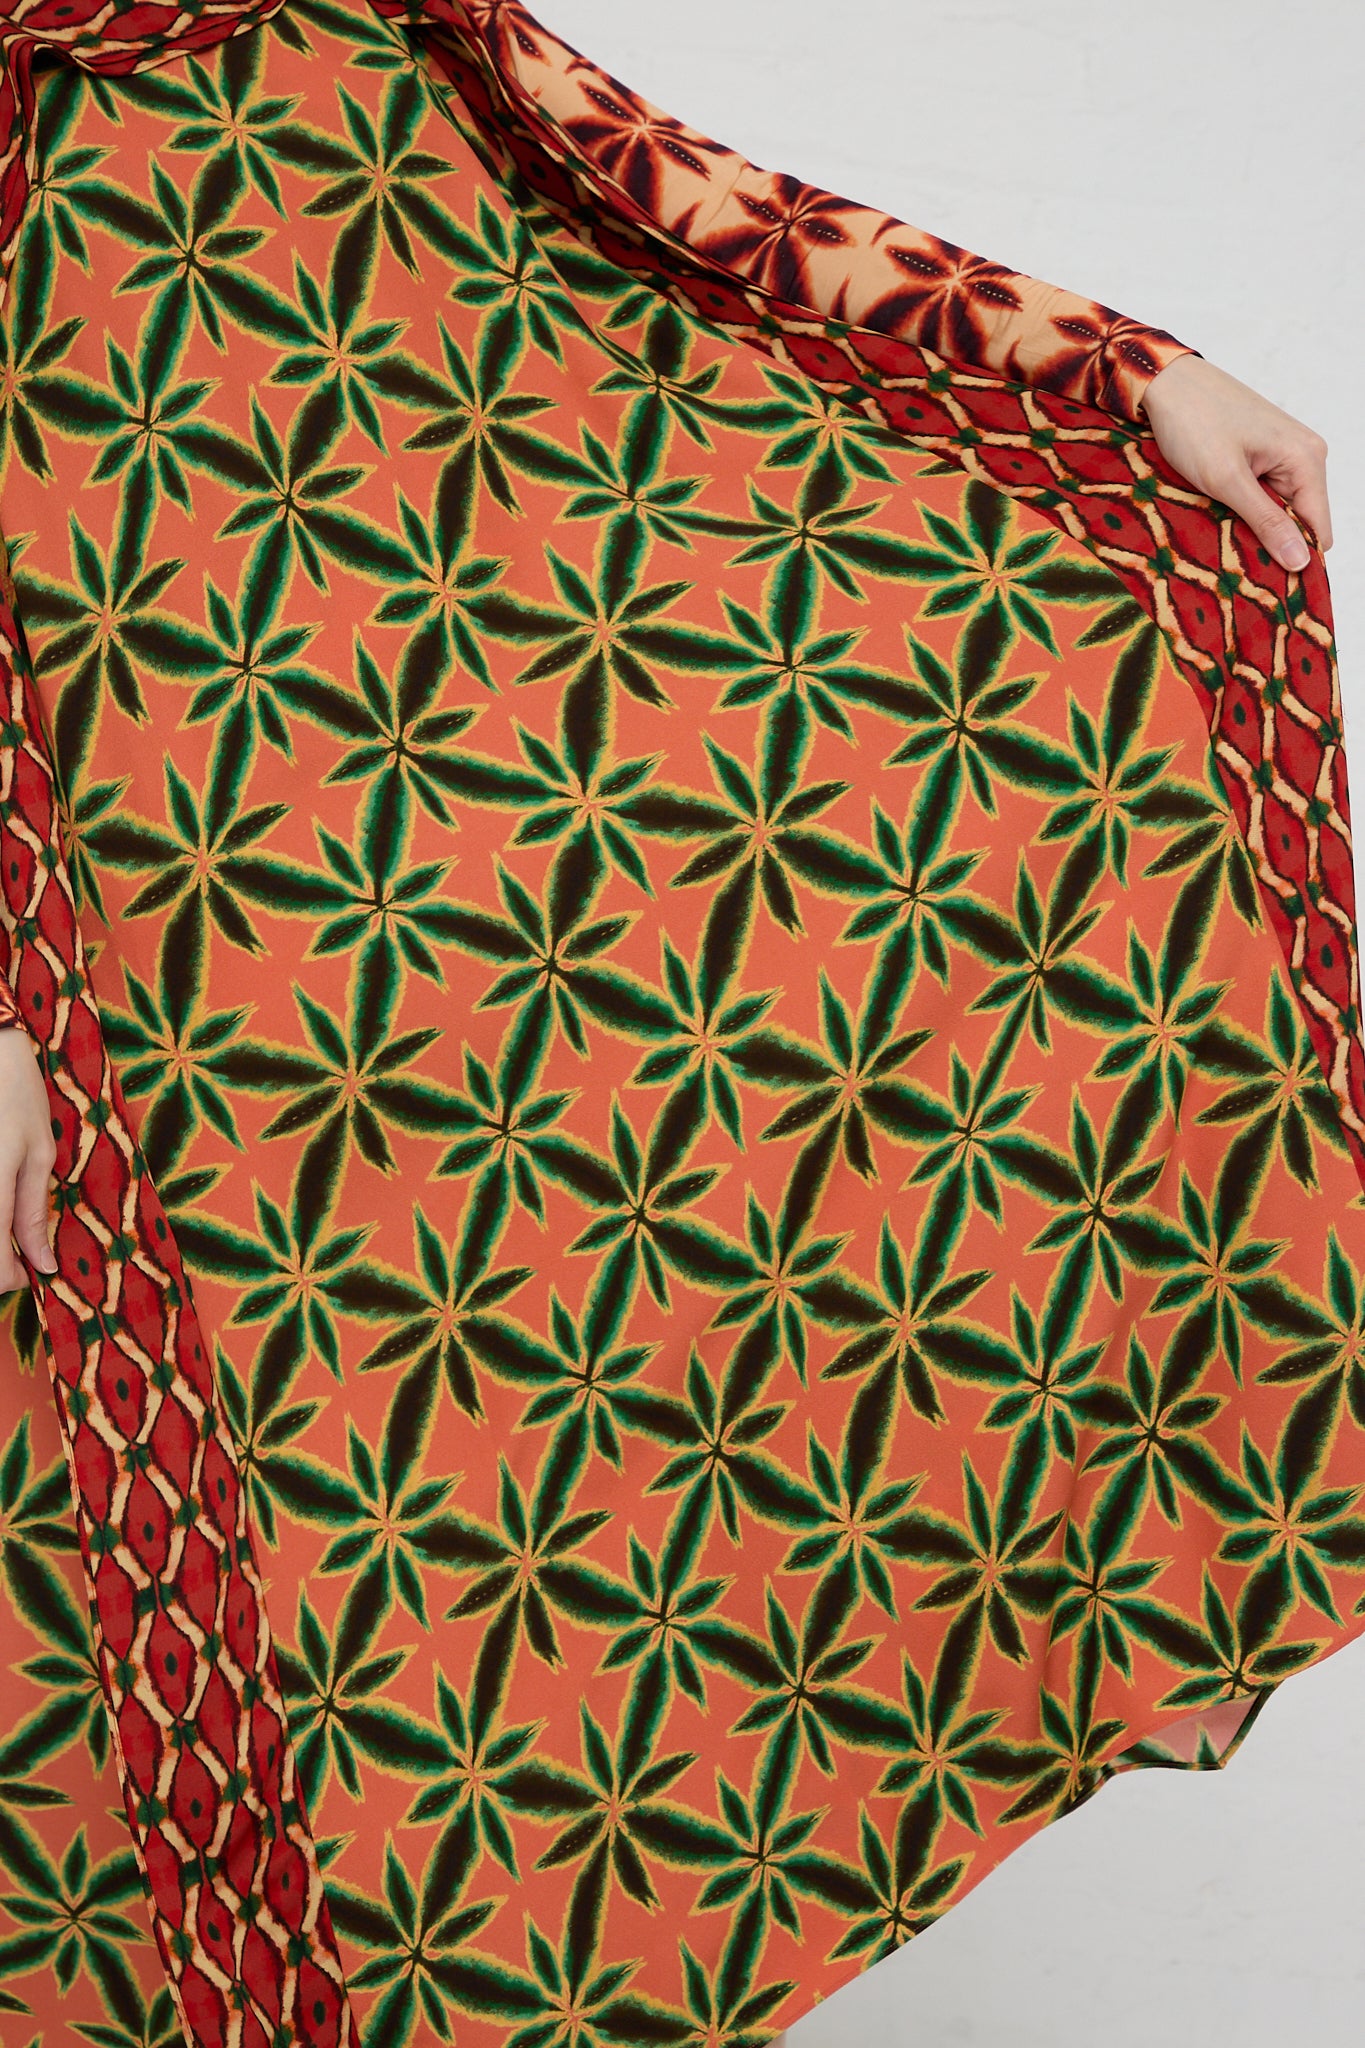 A woman wearing the Ulla Johnson Lily Dress in Fresco, an orange and green shibori printed midi dress. Up close view of fabric and details.